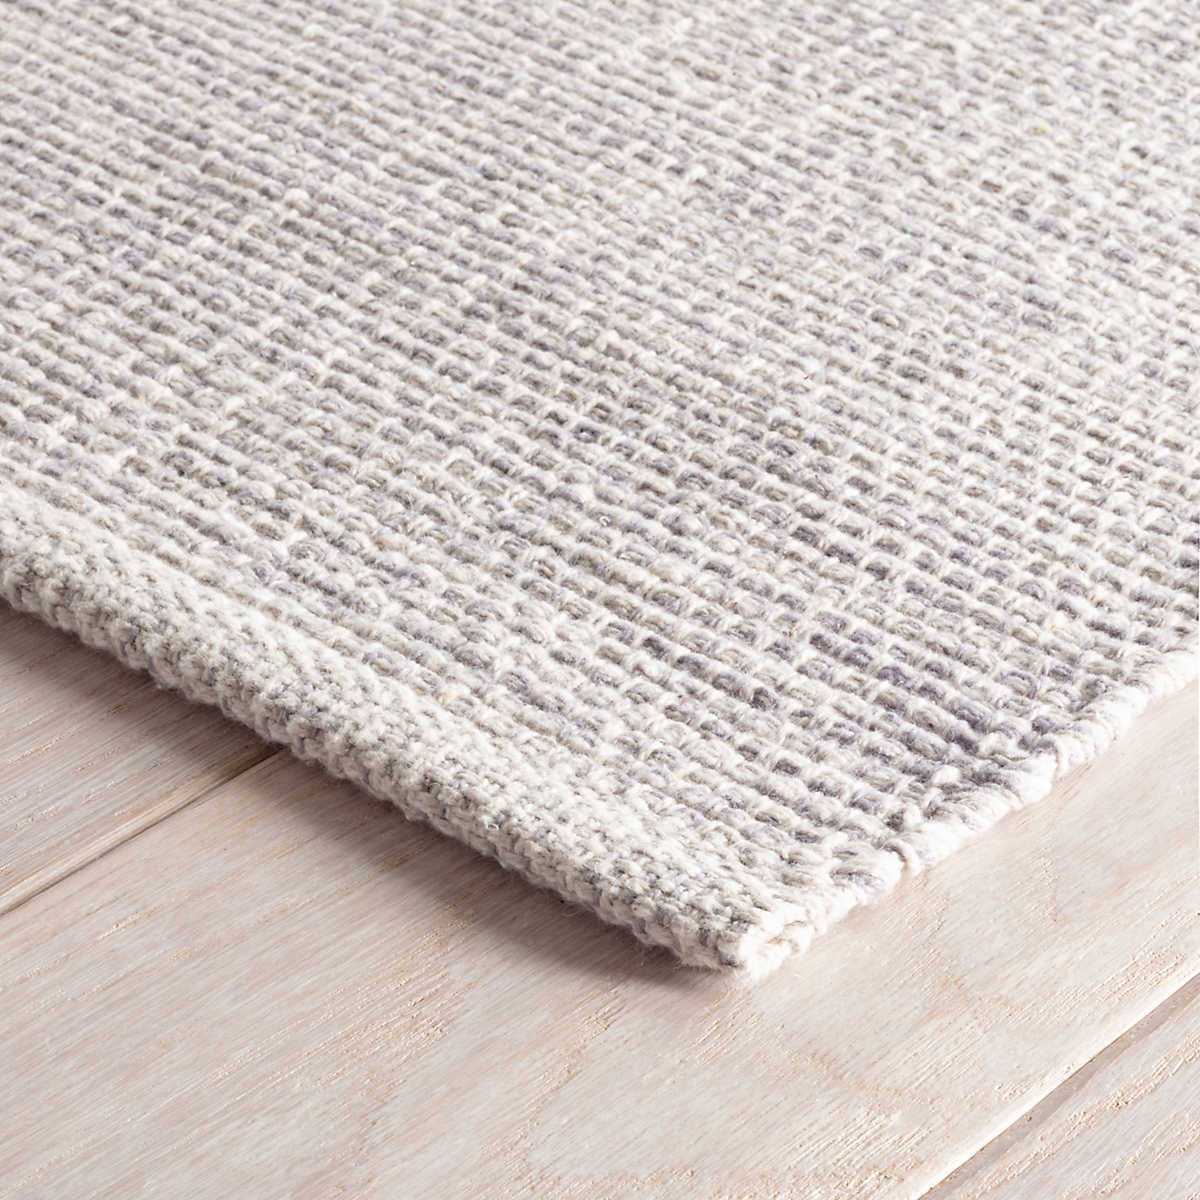 Marled Grey Woven Cotton Rug, 6' x 9' - Image 3